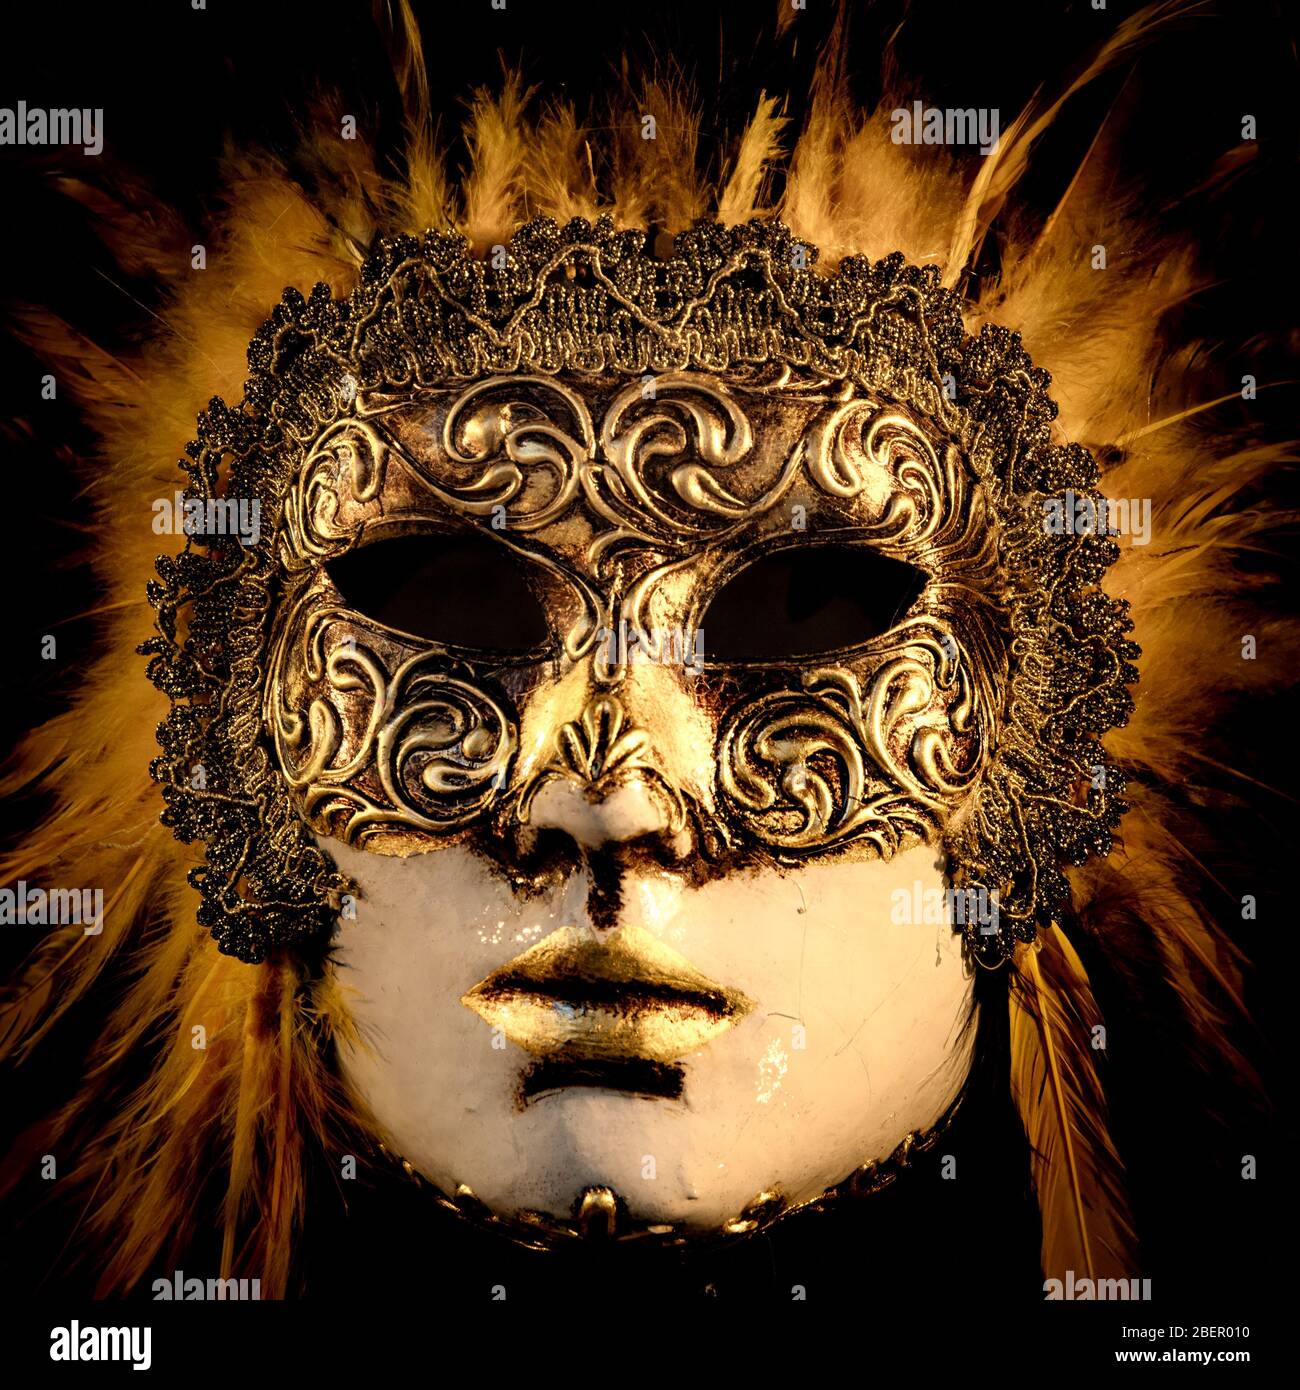 Venetian mask in glod with fur surround Stock Photo